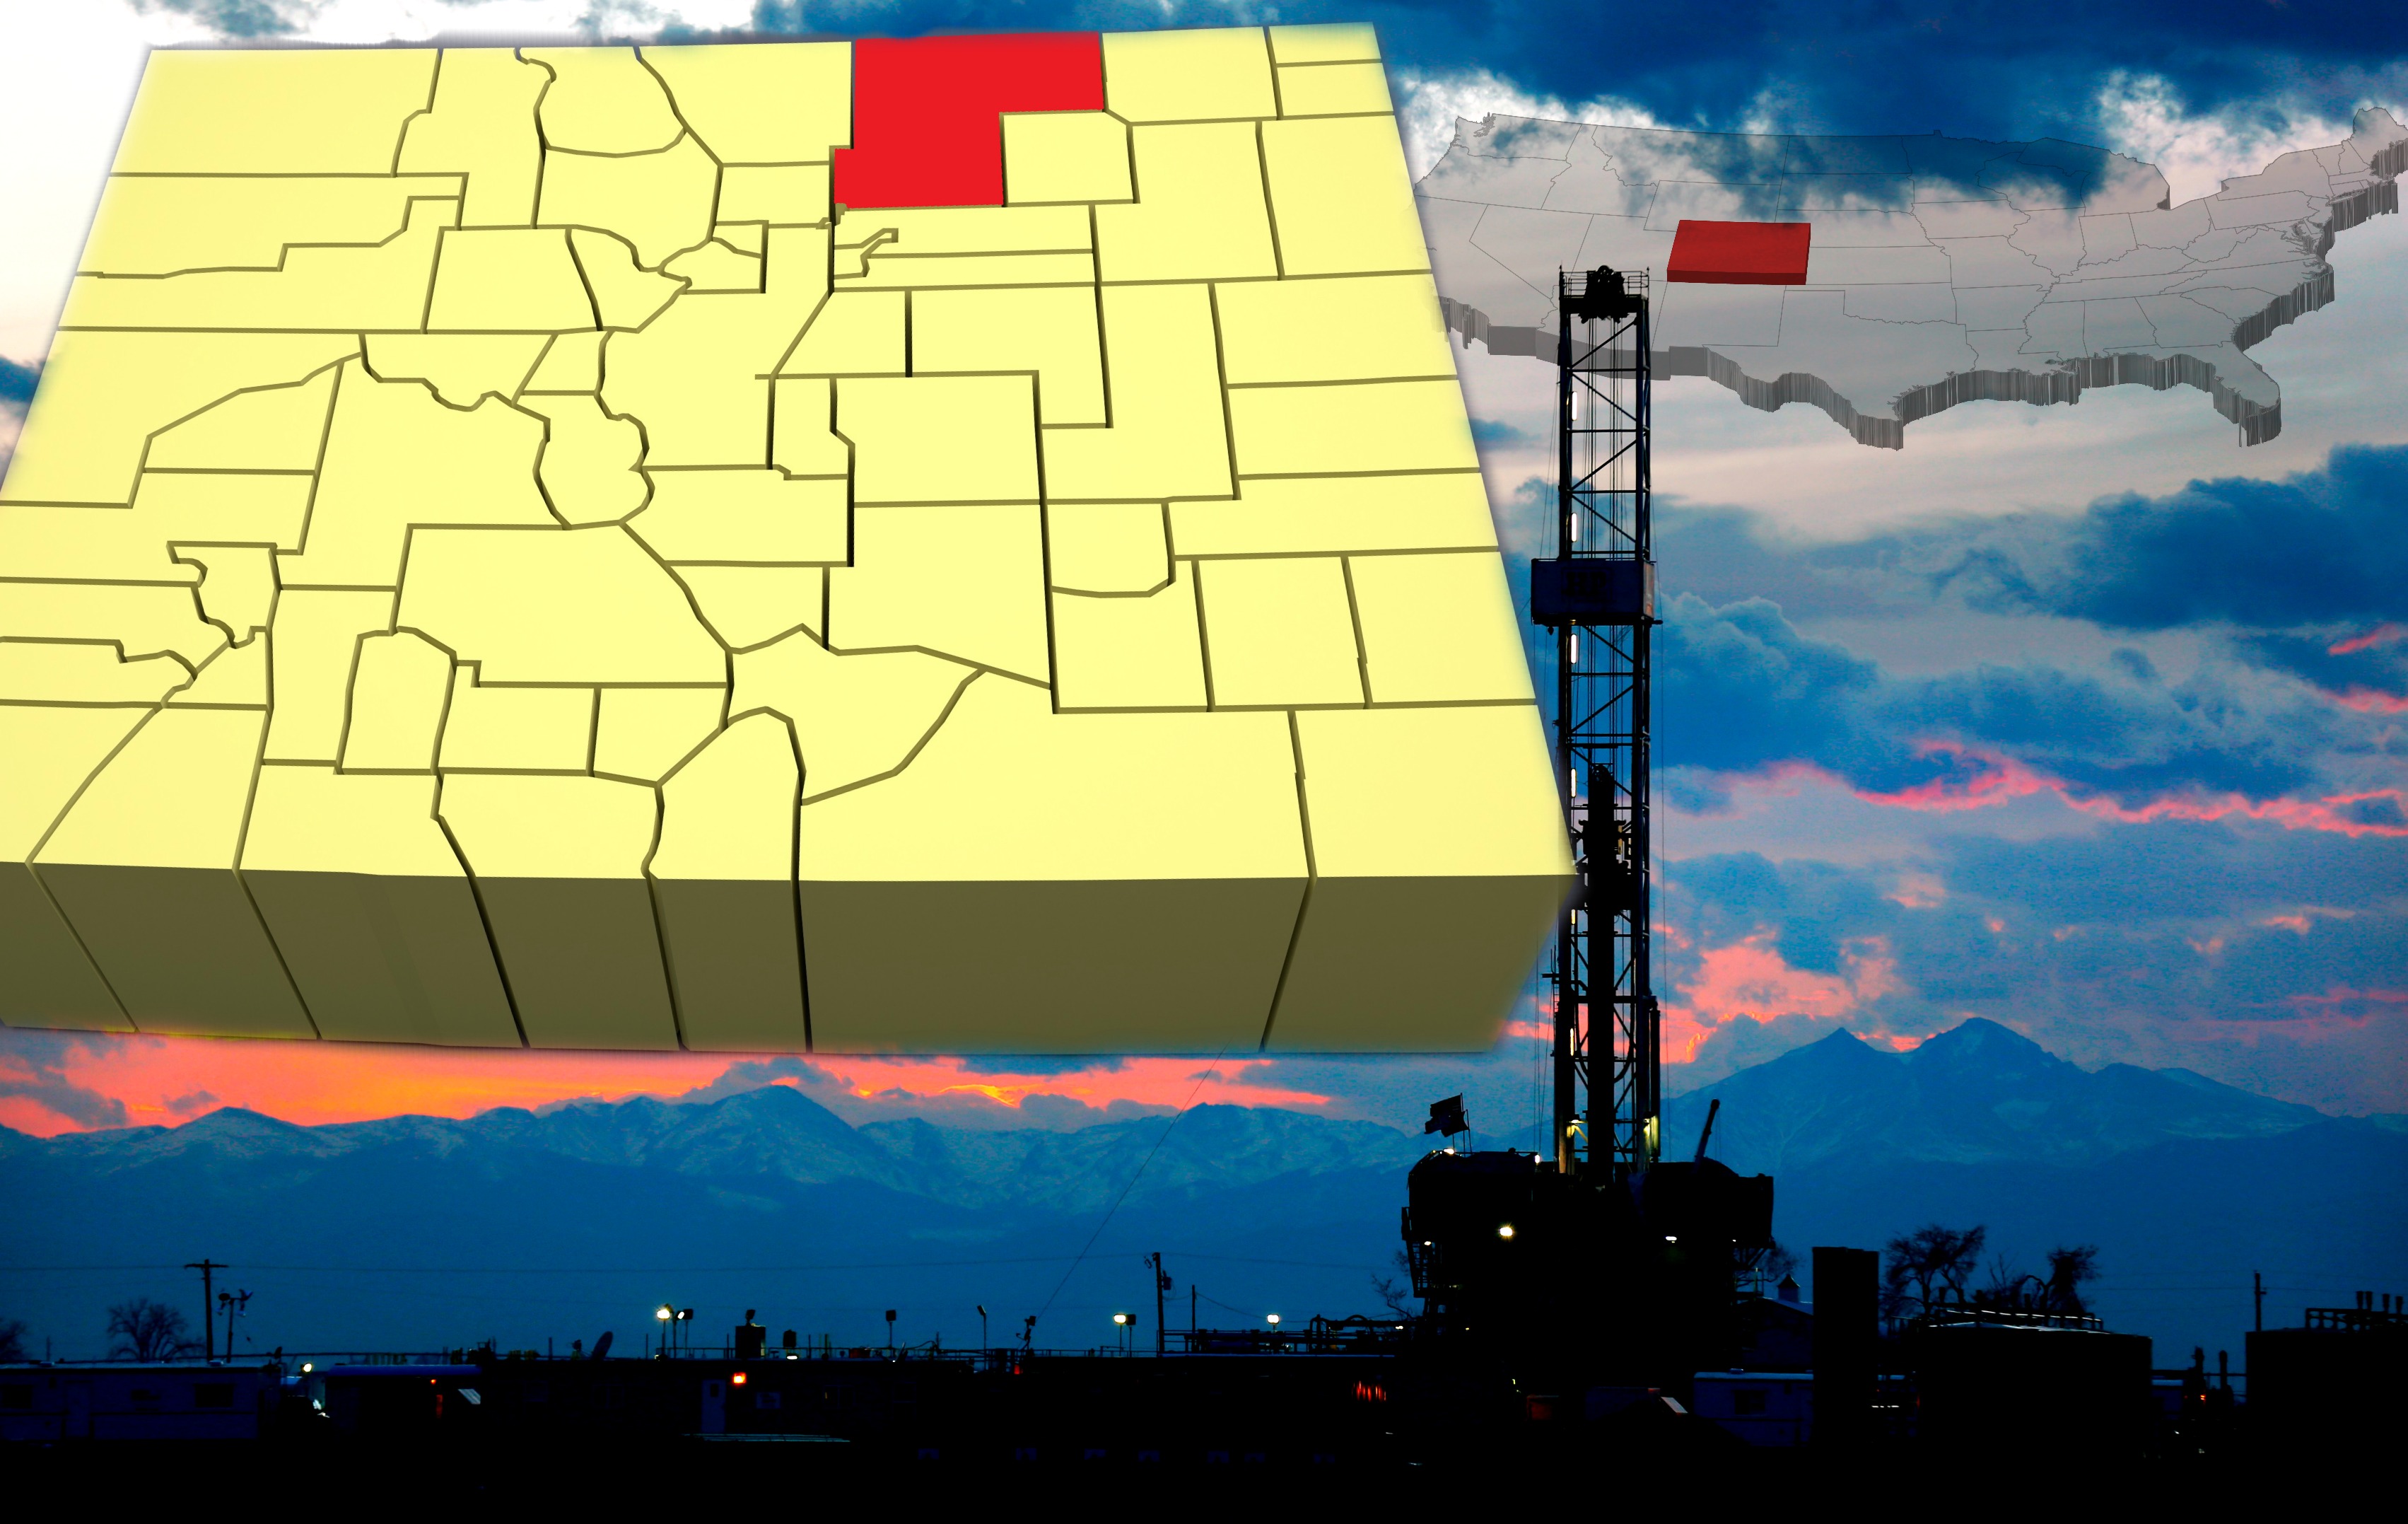 Atomic Capital Minerals, Lantana Energy Advisors, Swan Exploration, The Oil Gas Asset Clearinghouse, oil, natural gas, mineral interests, Wattenberg, Weld County, Colorado, Denver Julesburg Basin, DJ Basin, shale, Niobrara, Codell, fracking, sale, on the 